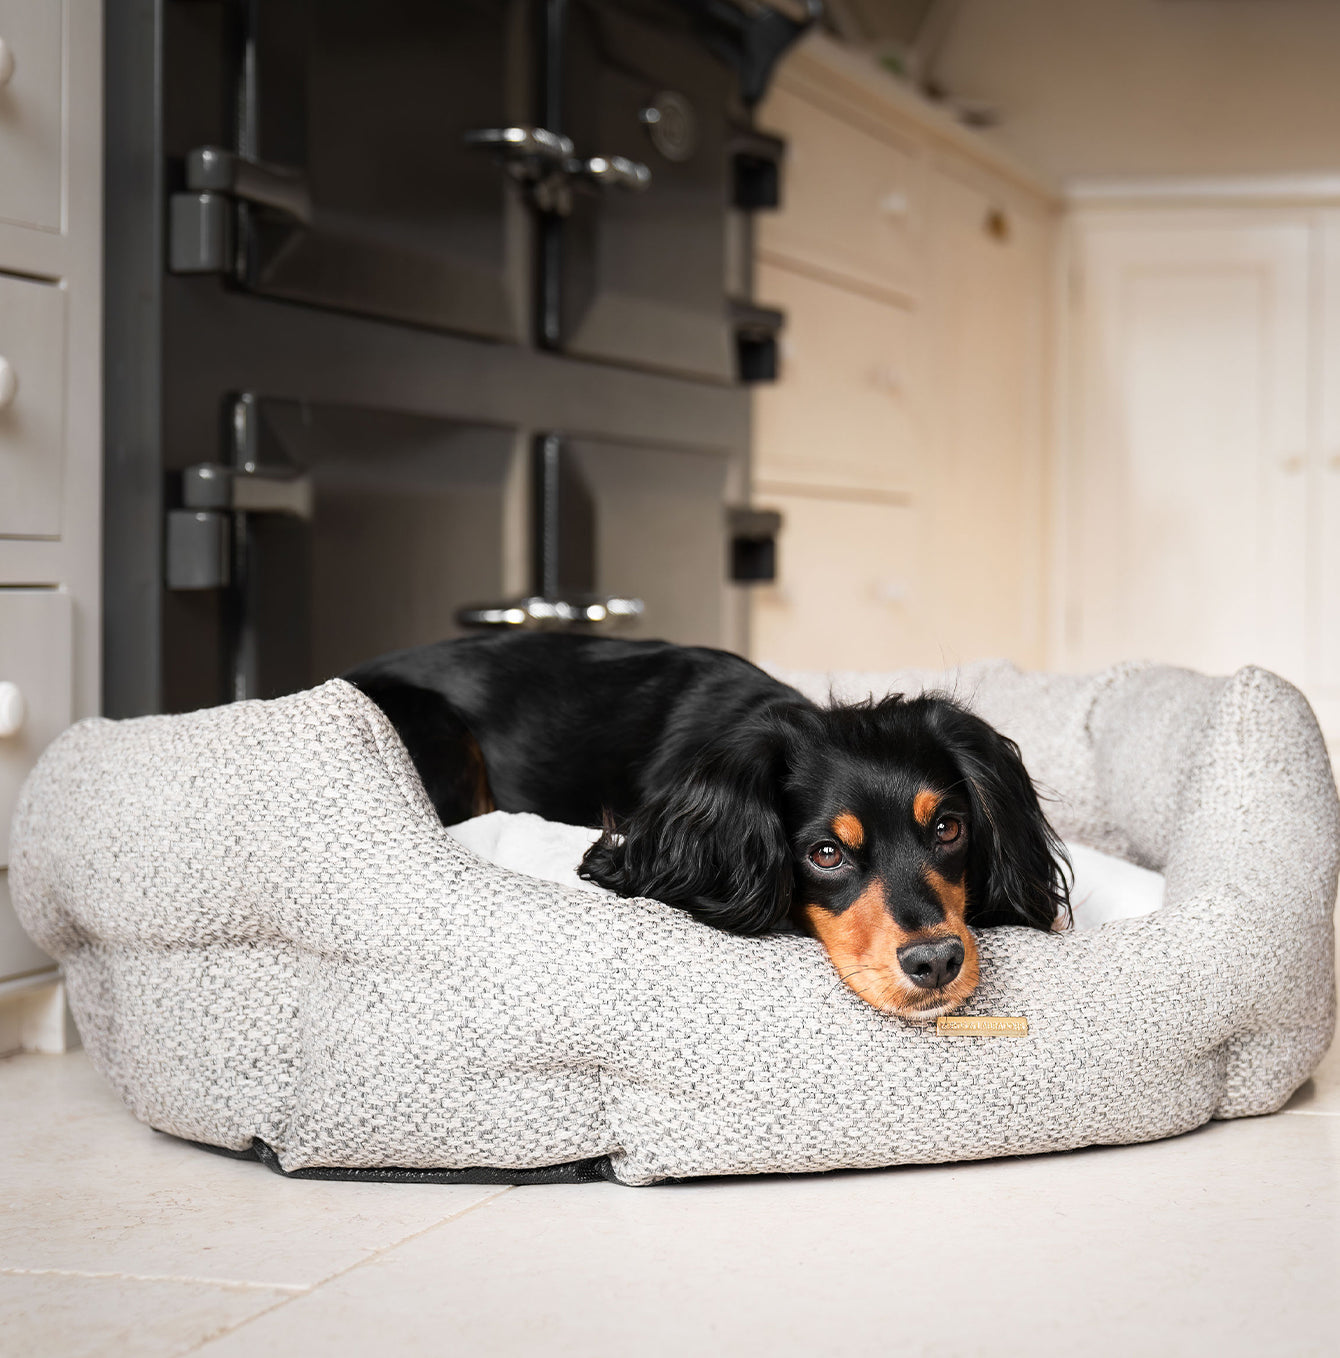 Discover our luxury Herdwick oval dog bed in beautiful pebble, the ideal choice for dogs to enjoy blissful nap-time, featuring reversible inner cushion with raised sides for dogs who love to rest their head for the ultimate cosiness! Handcrafted in Italy for pure pet luxury! Available now at Lords & Labradors US